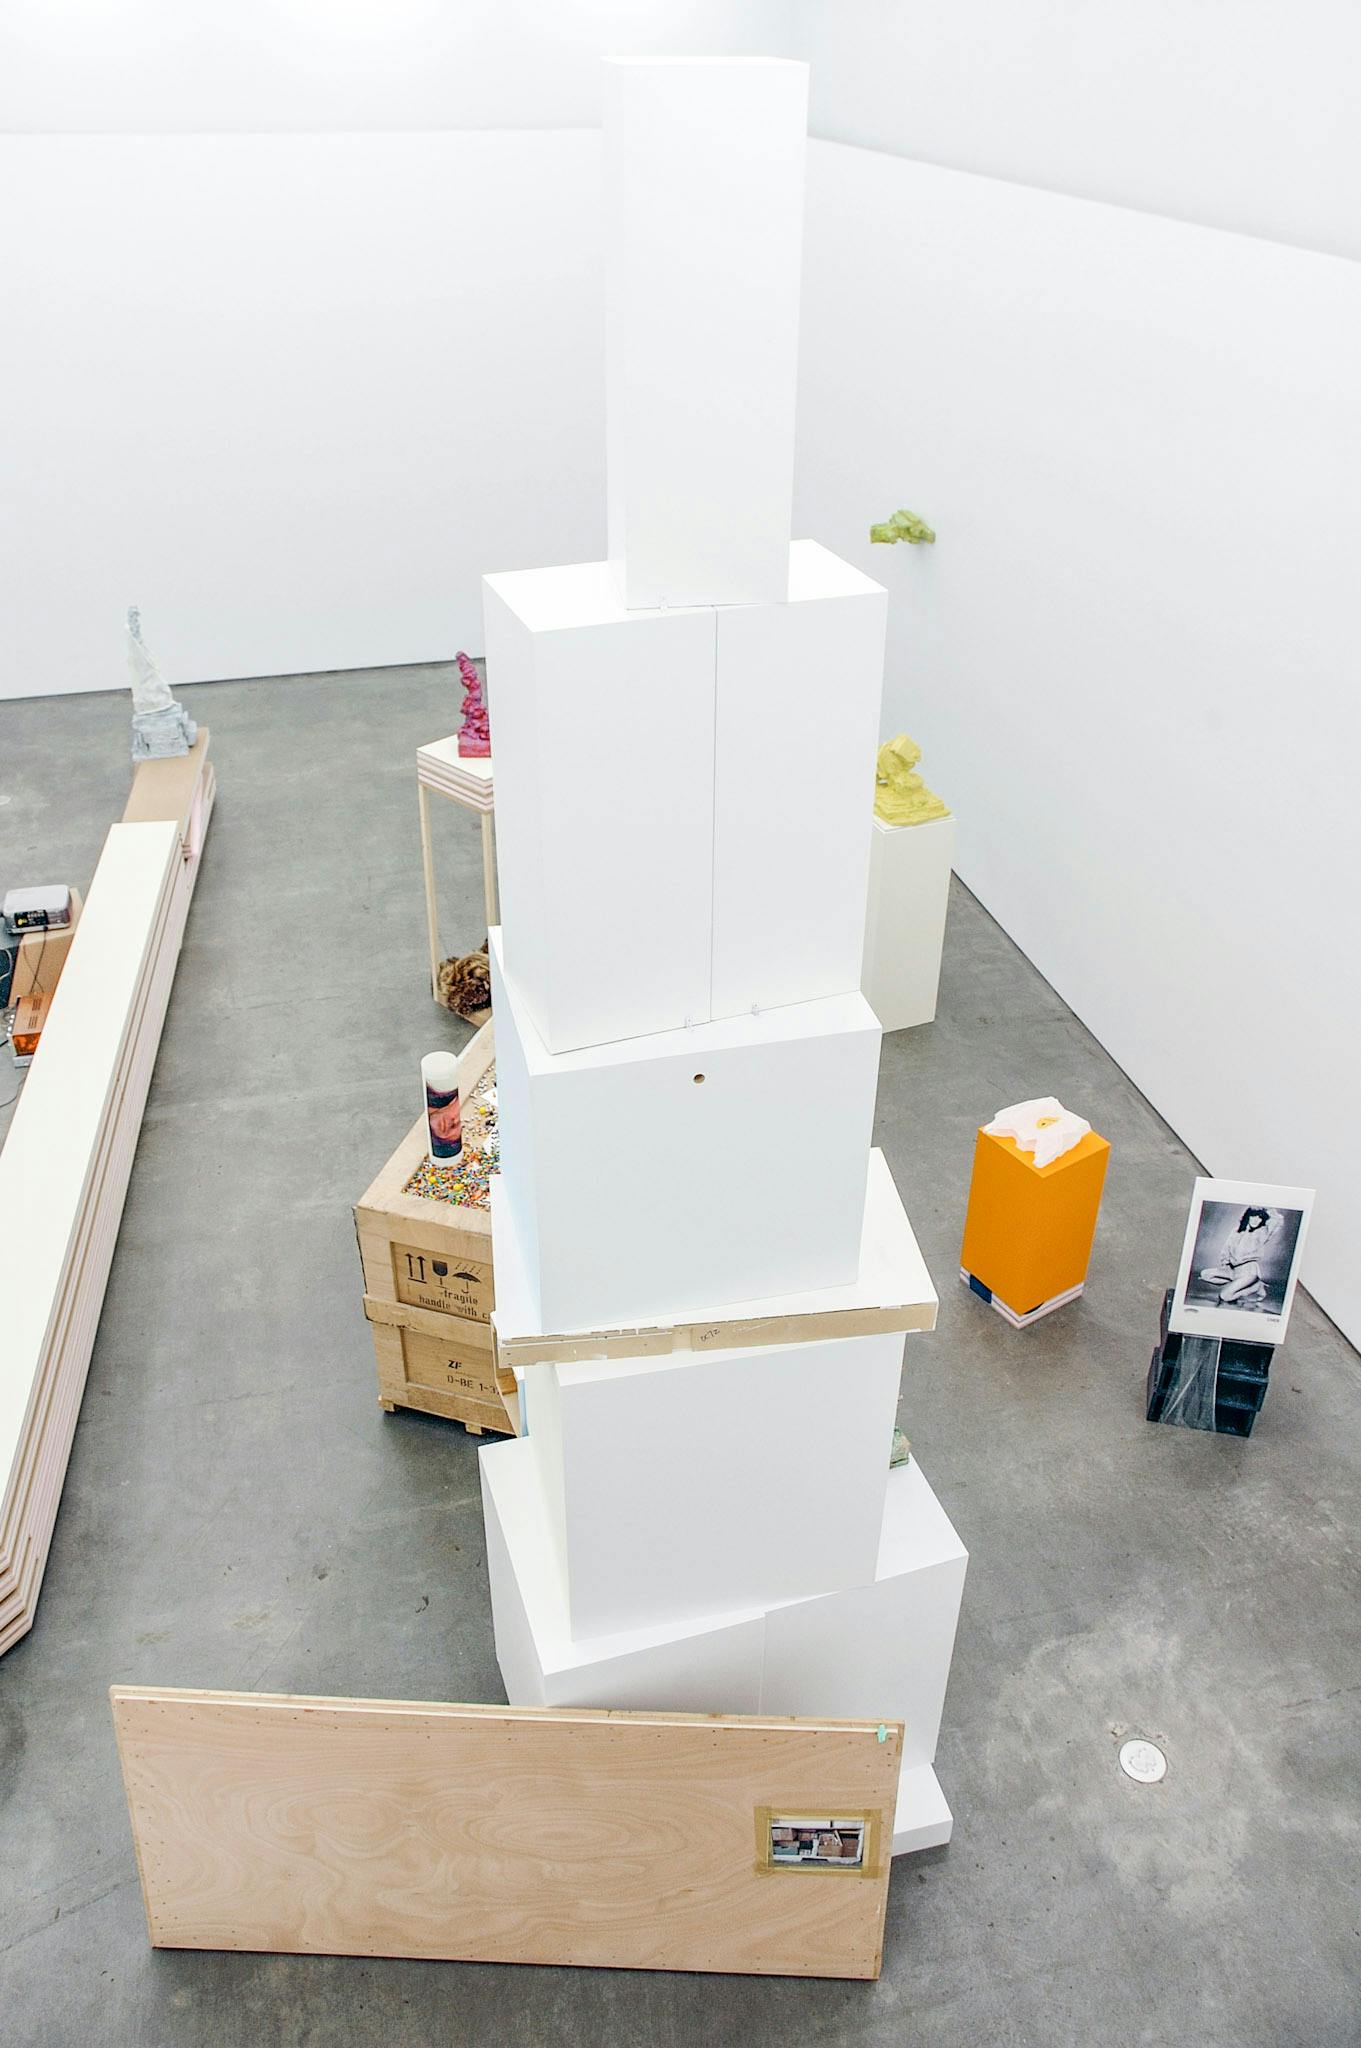 A view from above of artworks in a gallery. At the centre, there is a tall tower of several white plinths, stacked. Other objects include planks of plywood and a photo of a person, posing semi-nude.